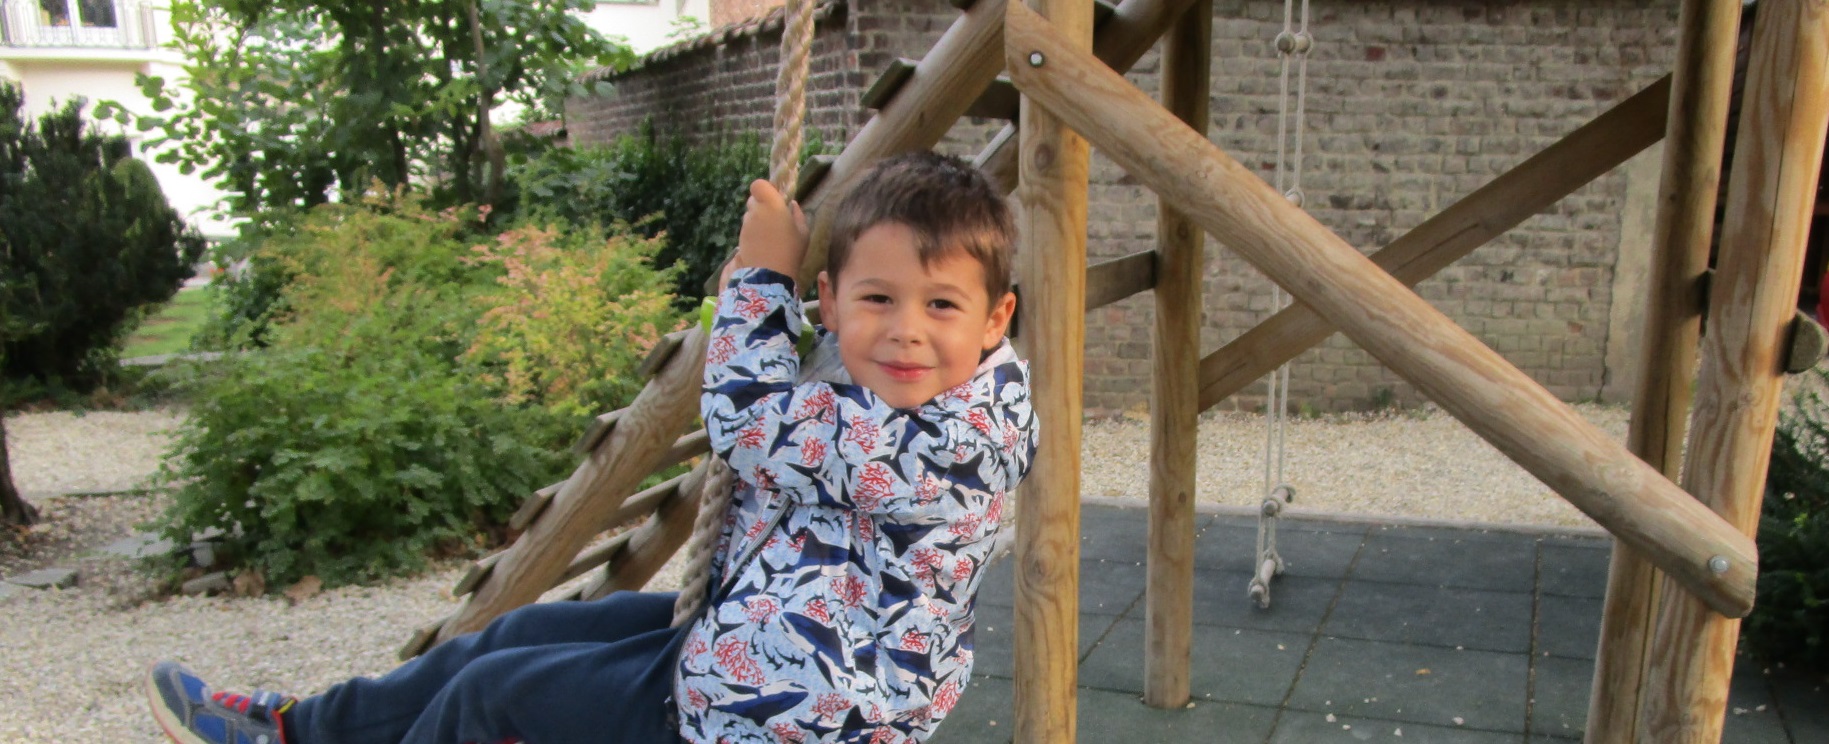 A child smiling at the camera while using the swing.